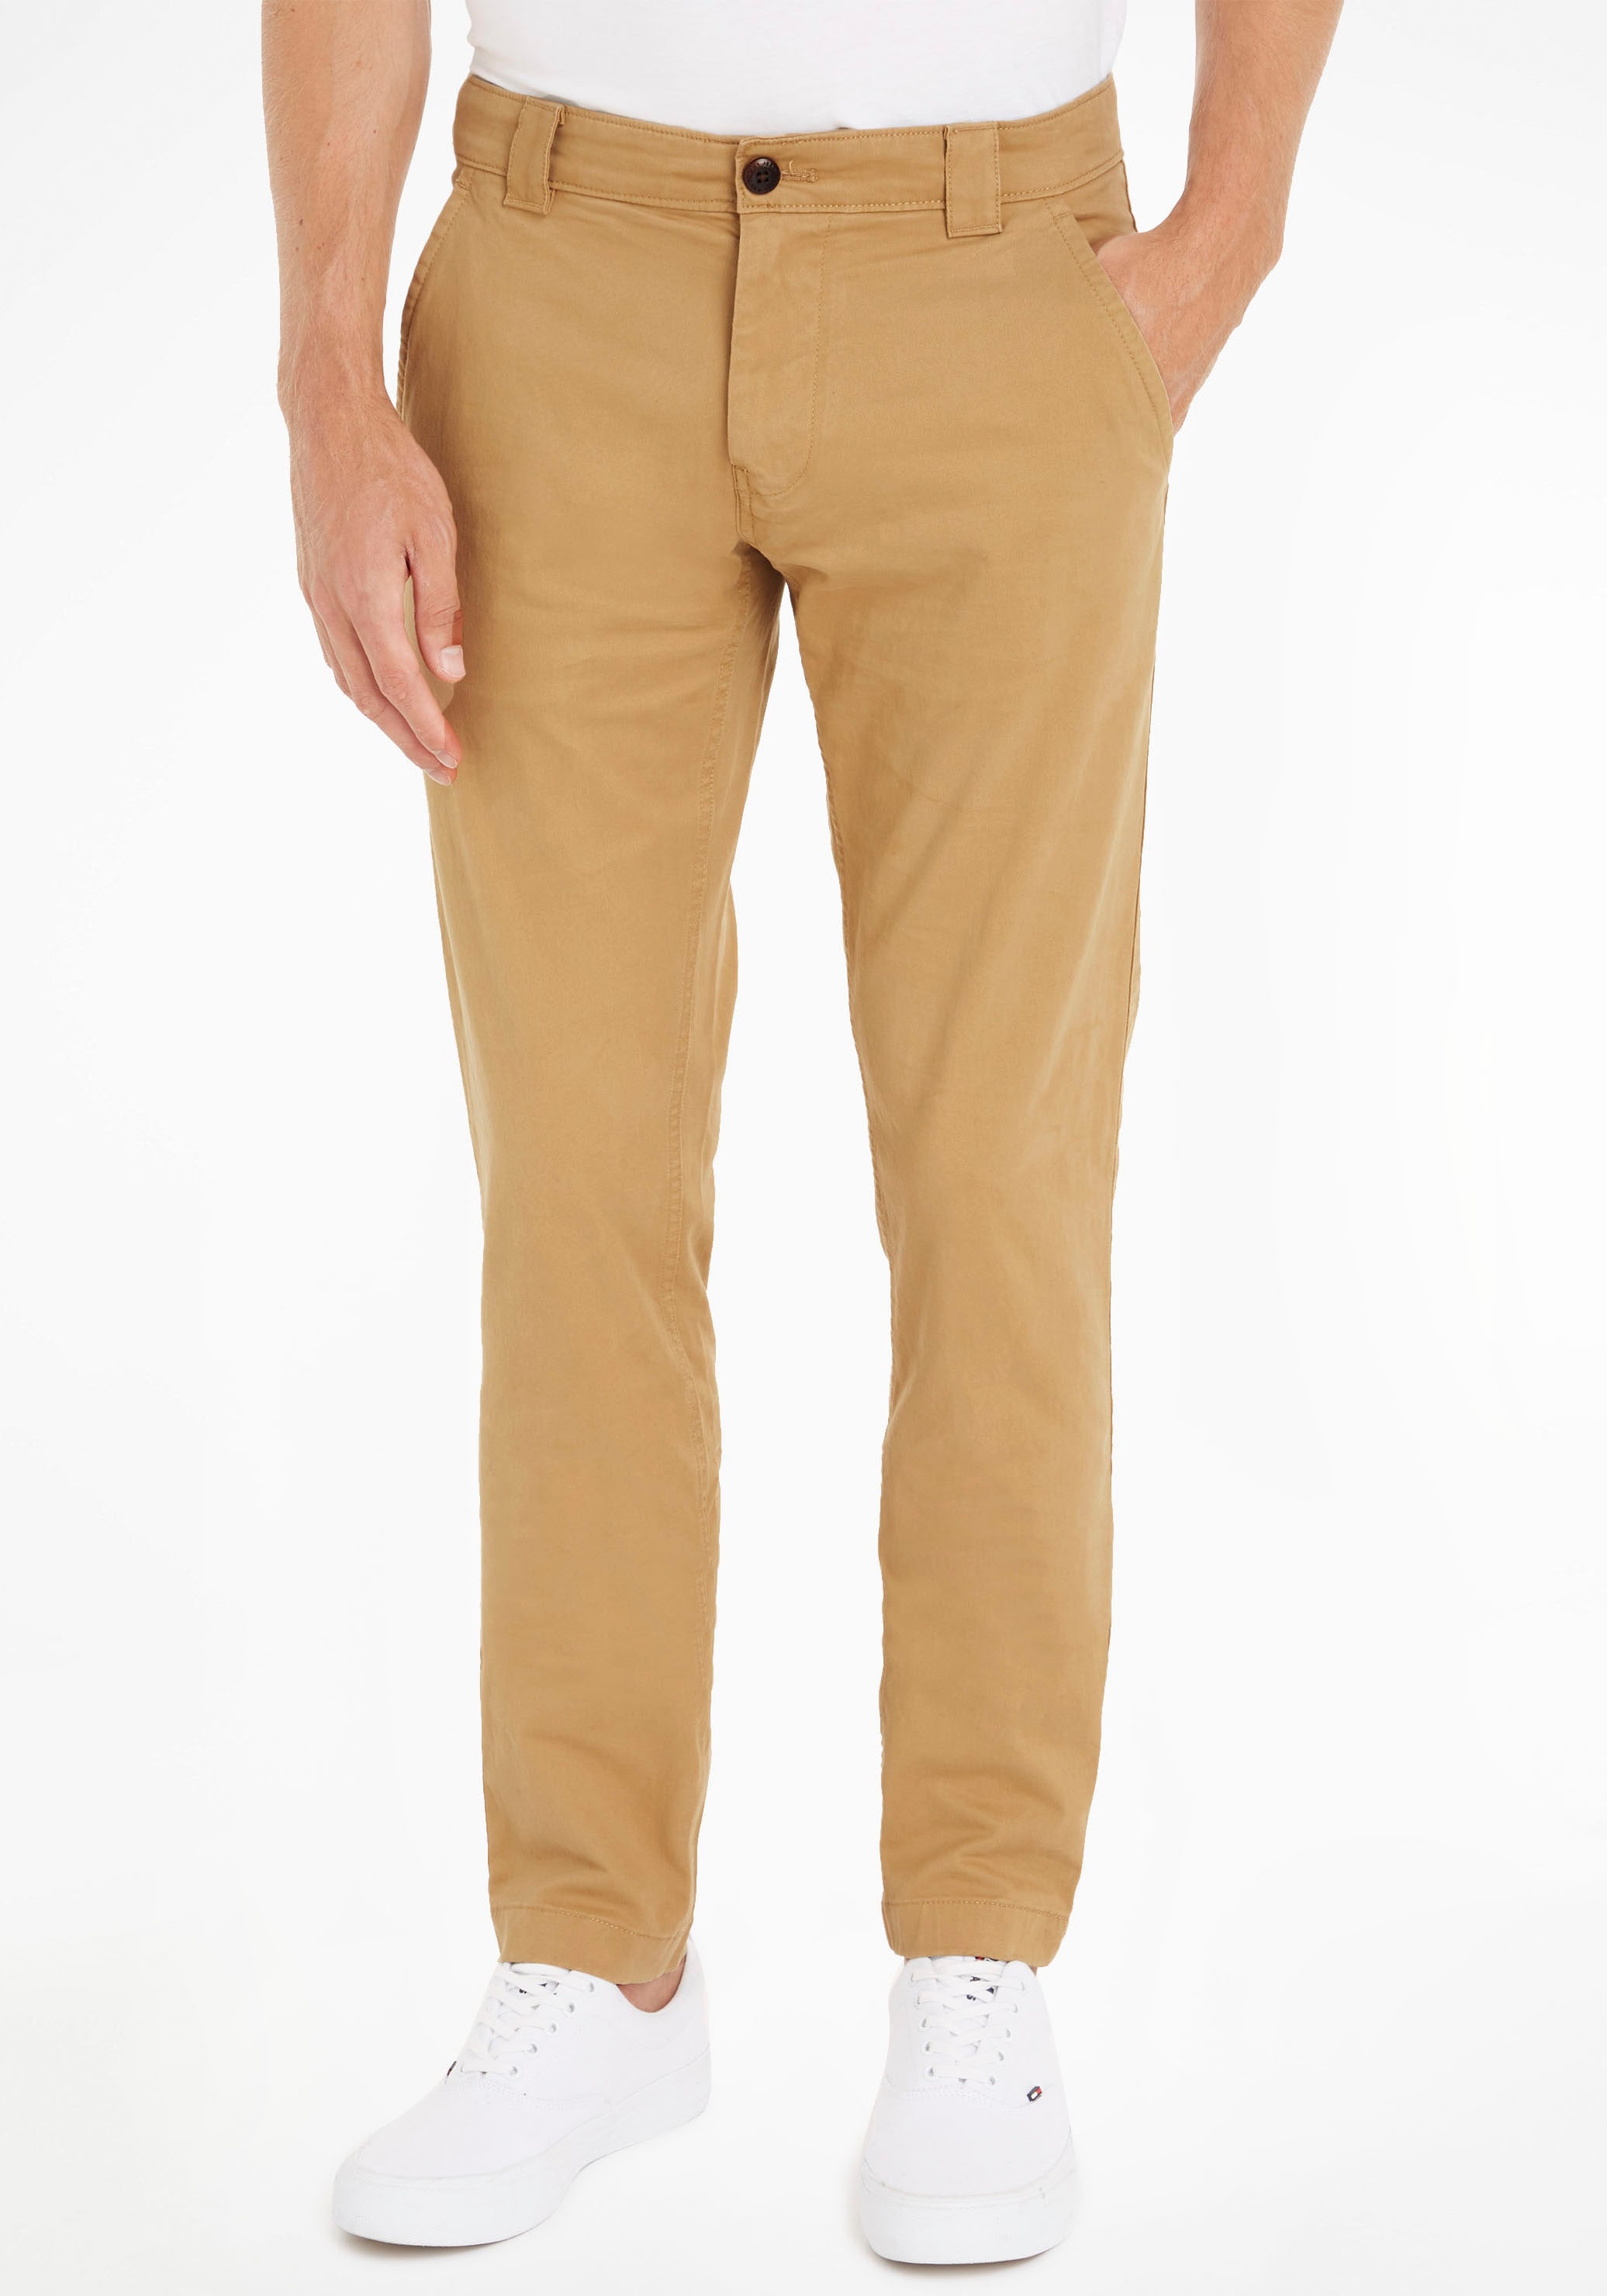 Markenlabel CHINO bei PANT«, »TJM Chinohose Jeans Tommy ♕ mit SCANTON